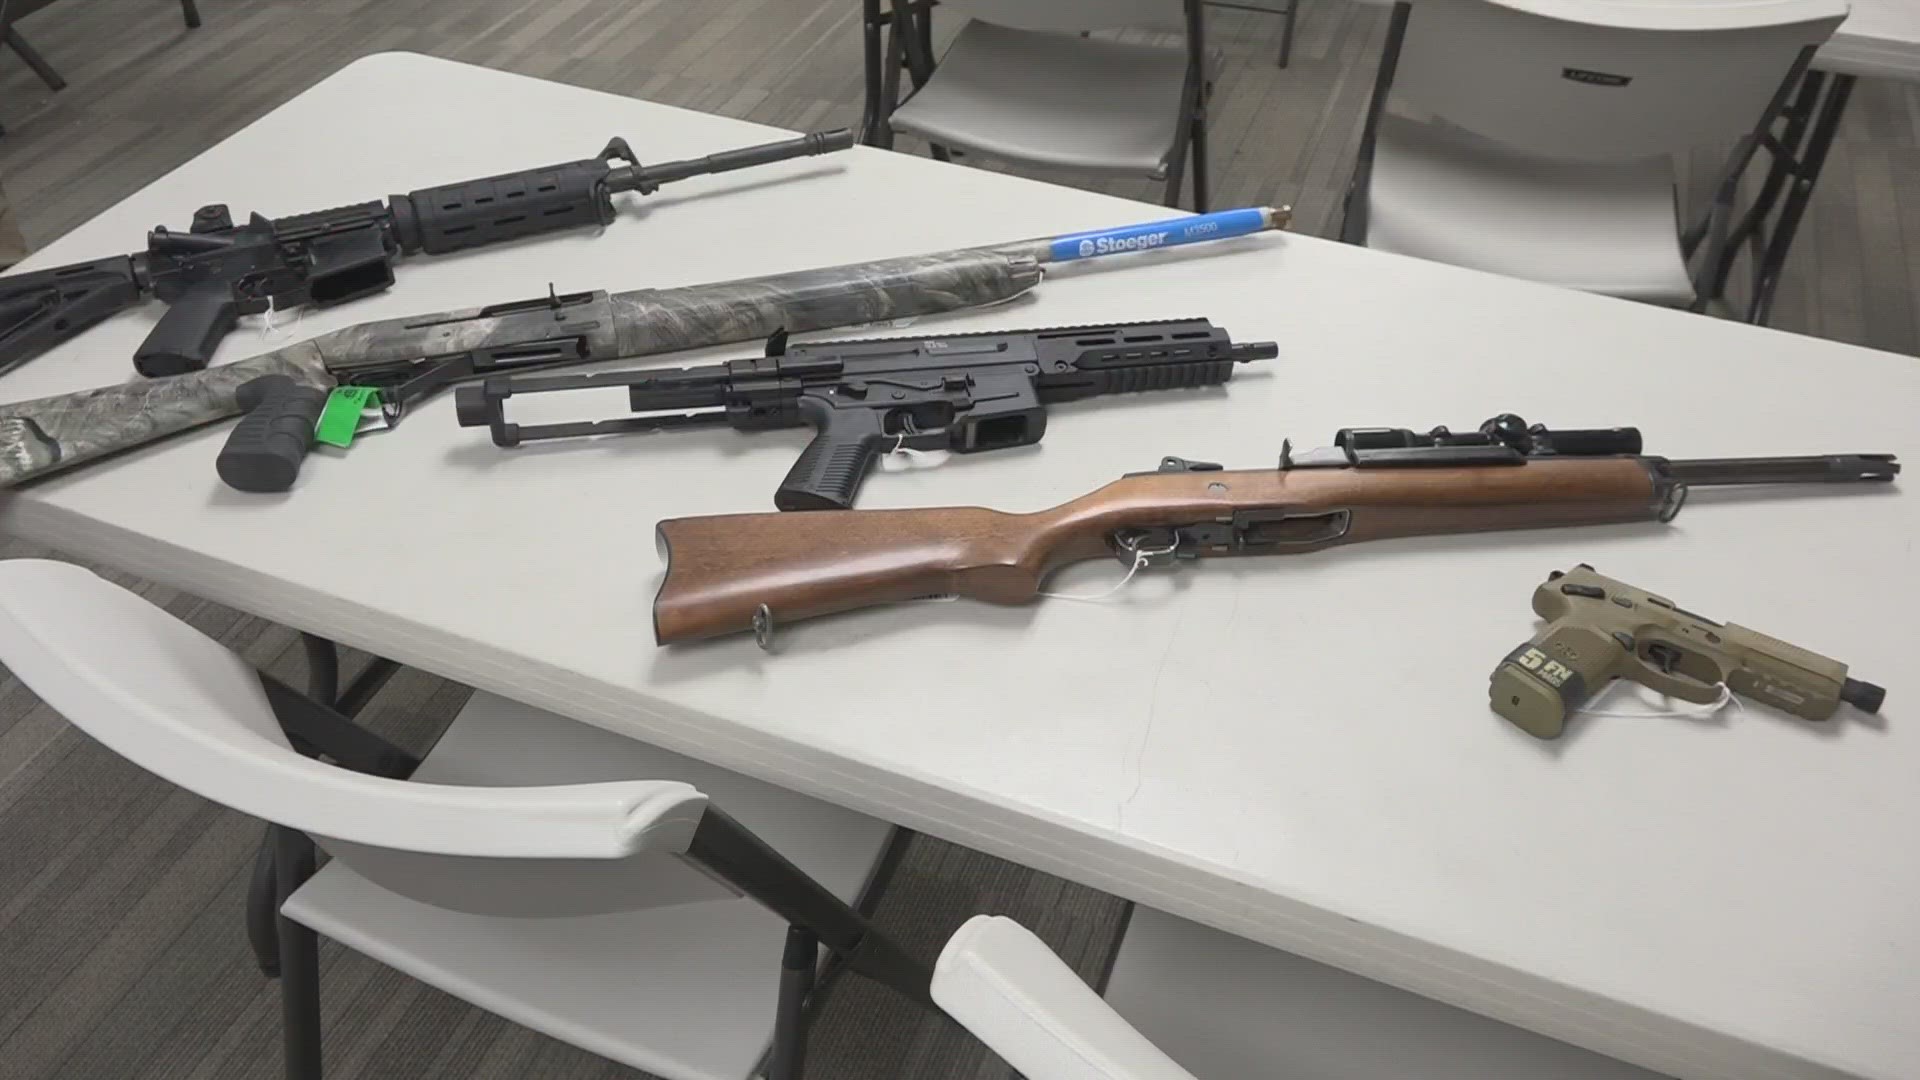 A federal judge on Tuesday rejected a request to block a new Washington state law banning the sale of certain semi-automatic rifles.